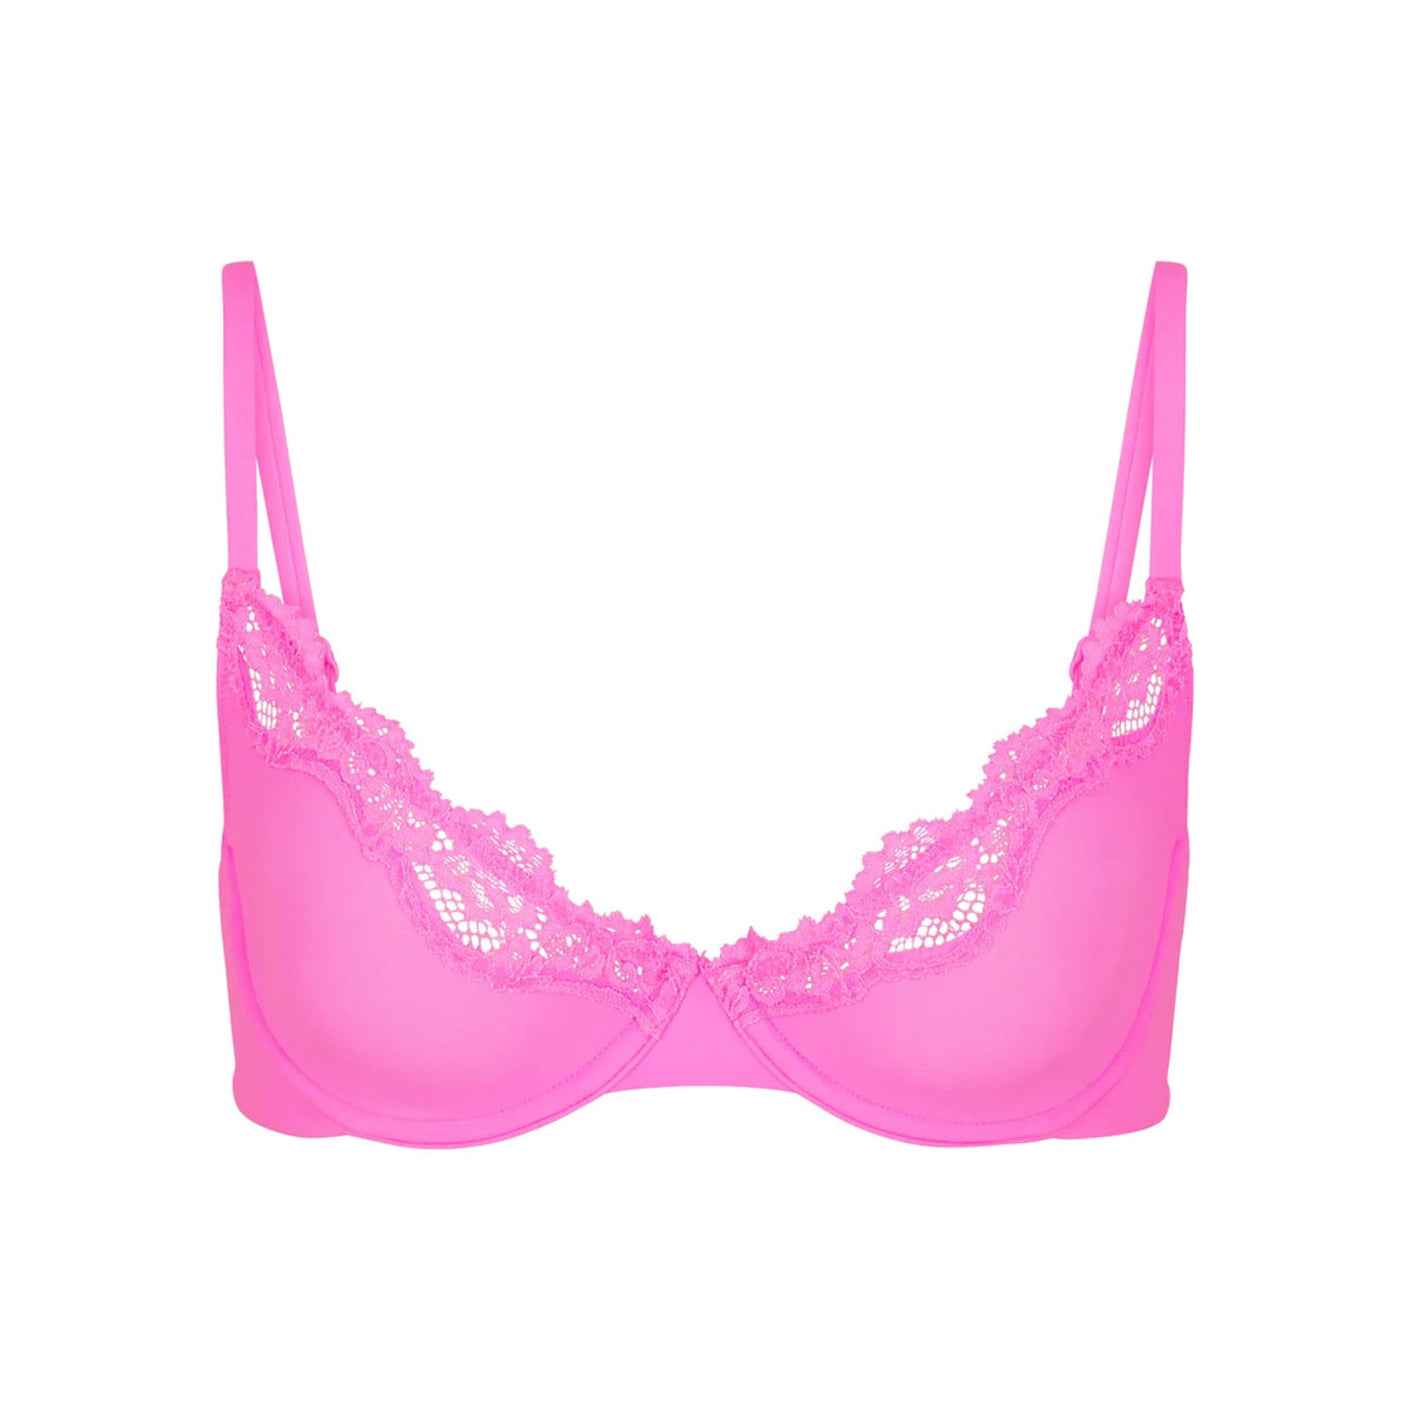 Explore Your Femininity with an Open Cup Bra